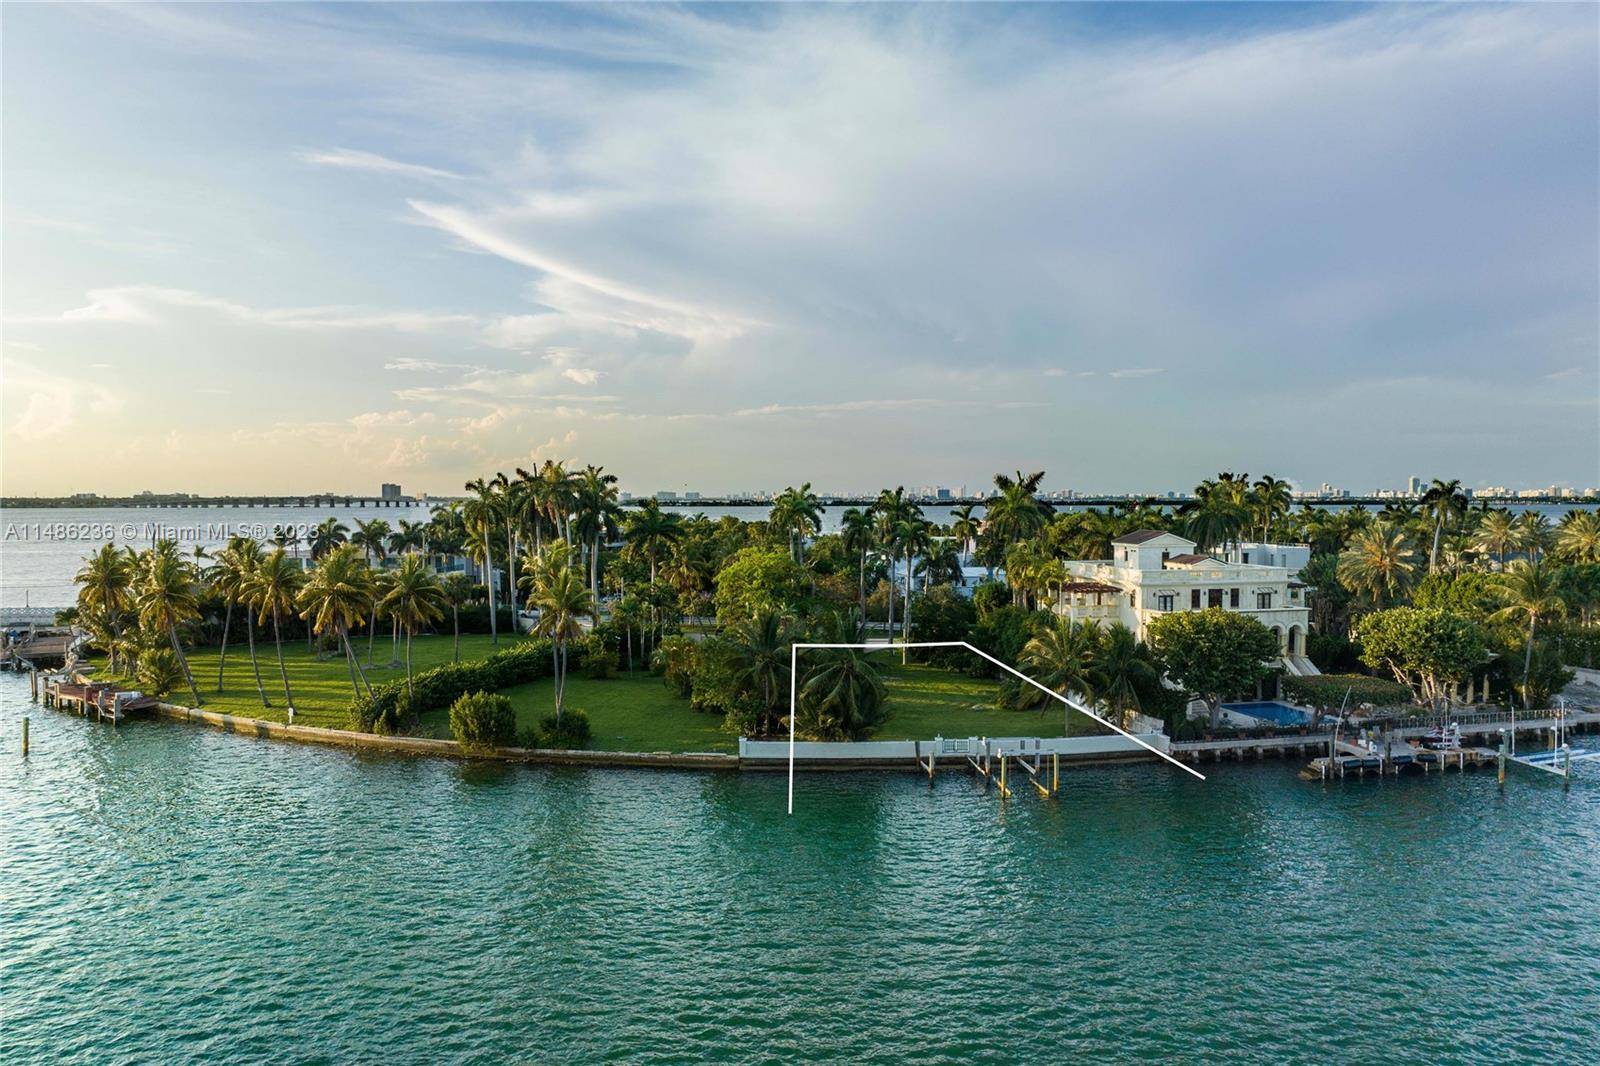 1236 S. Venetian Way is a vacant waterfront lot boasting 103.